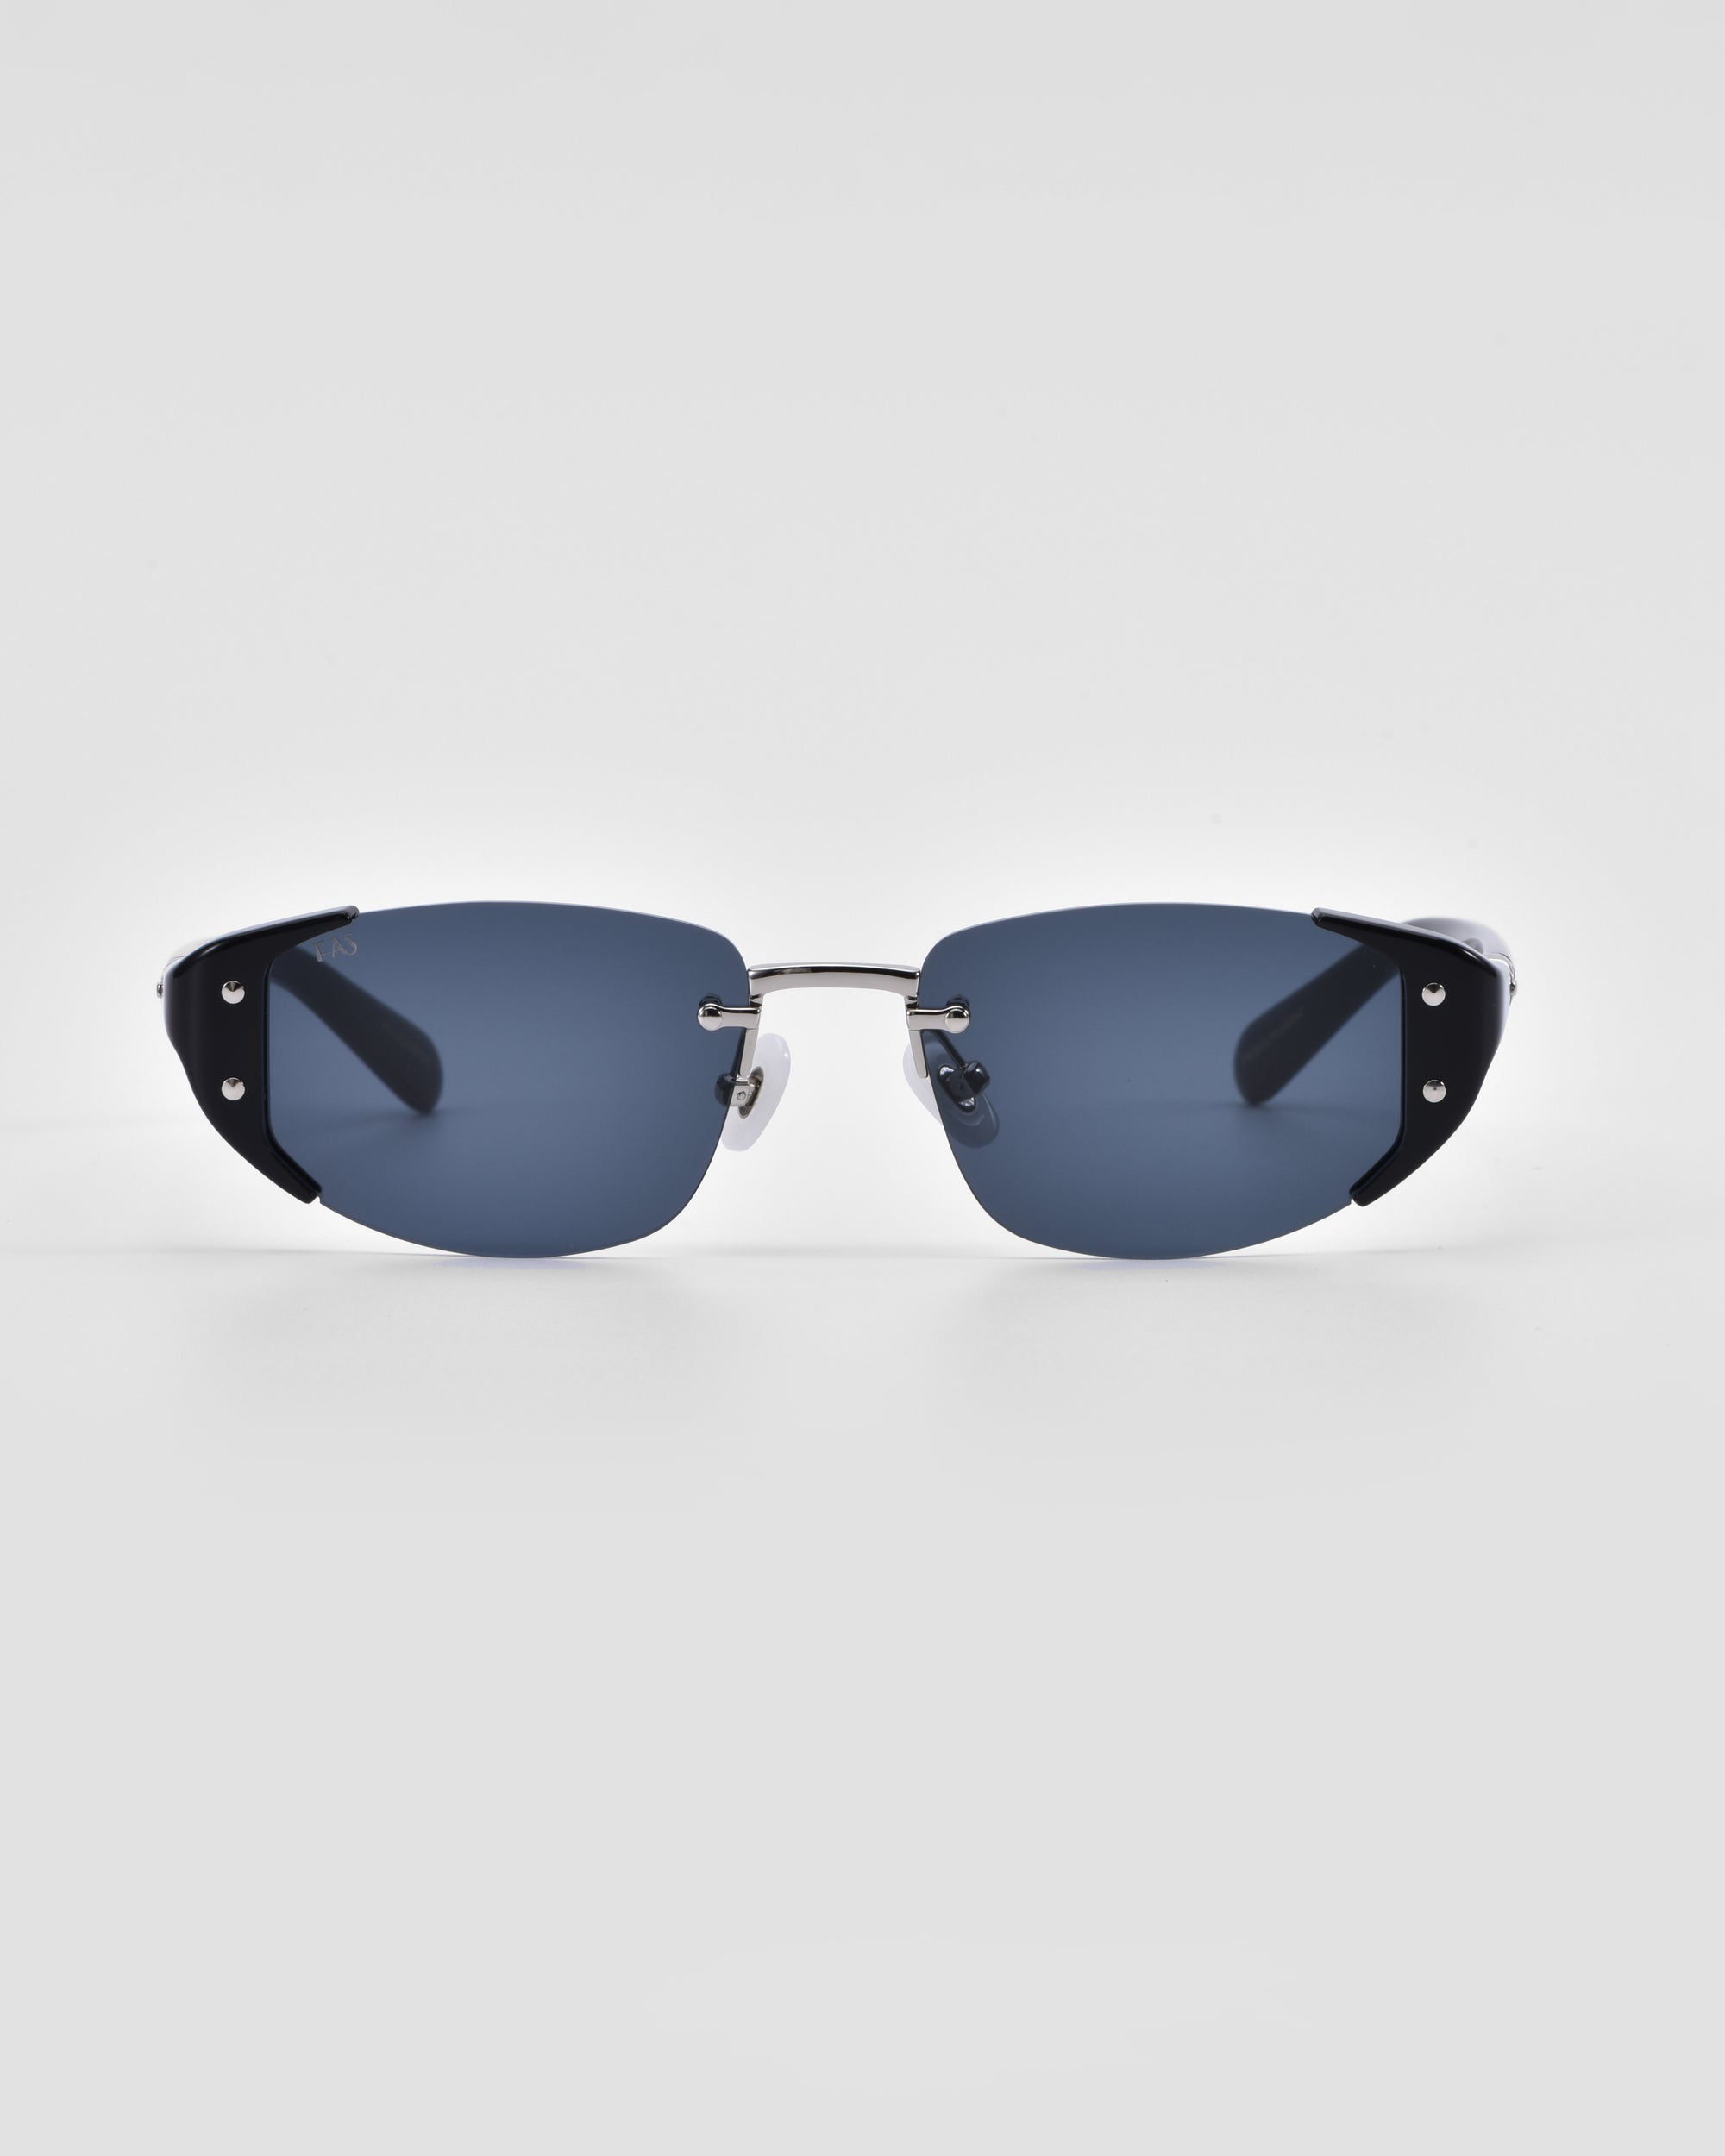 A pair of modern, rimless Harbour sunglasses by For Art&#39;s Sake® with dark blue tinted lenses and thin metallic arms featuring black accents near the hinges. The 18 karat gold plating adds a touch of luxury, while the plain white background emphasizes the sleek design and minimalist style of this retro-inspired eyewear.